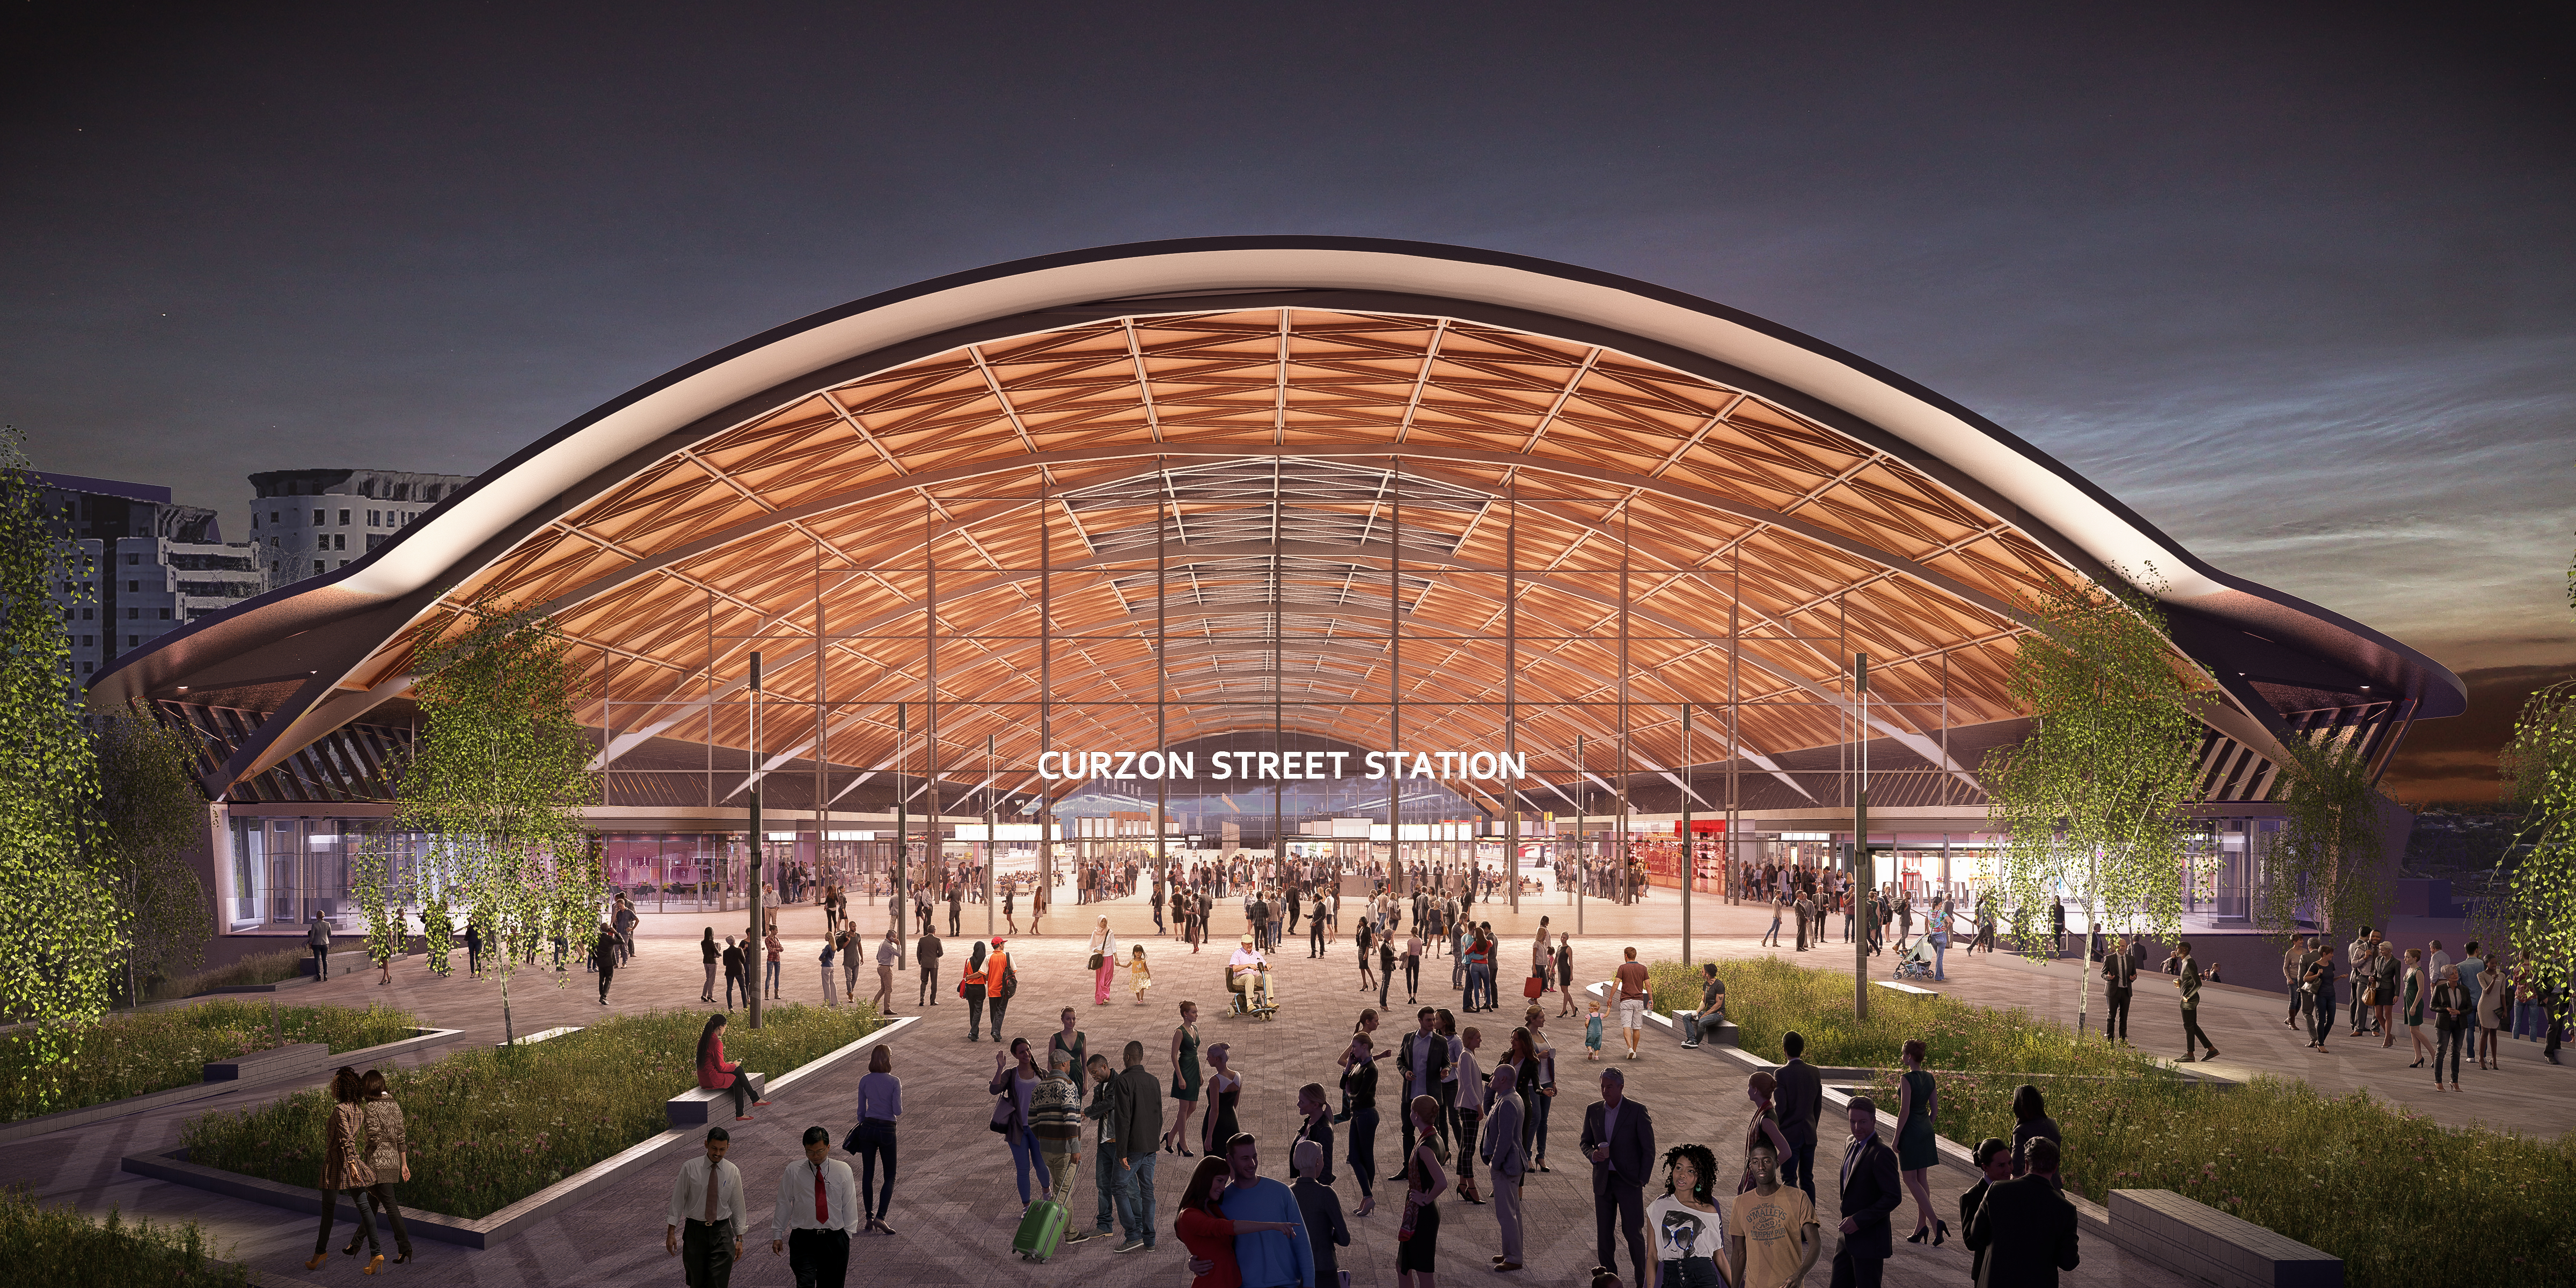 Design of the new Curzon Street station in Birmingham